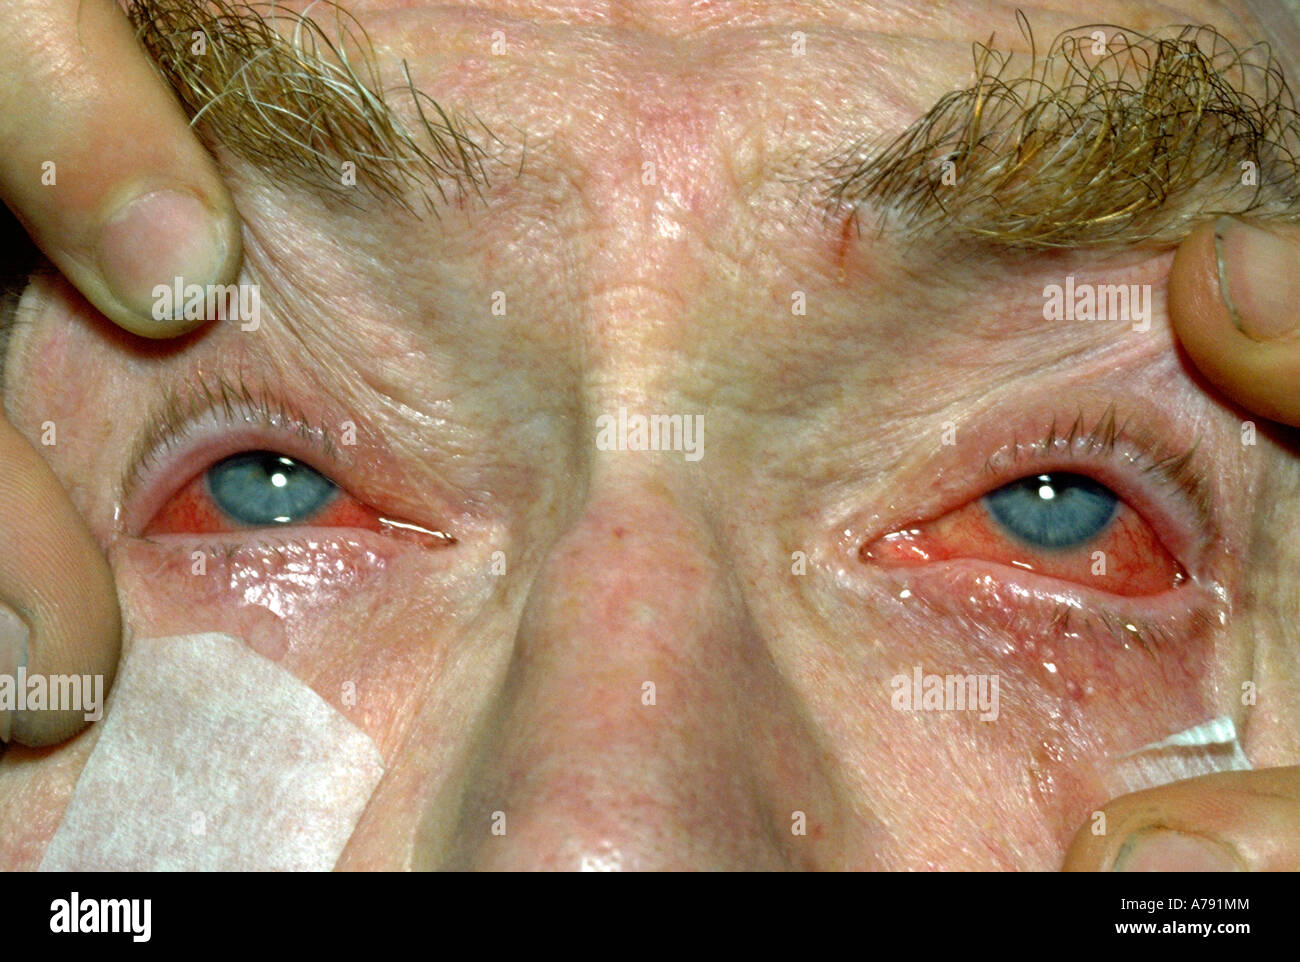 The white wall of the eye, called the sclera, is the eye's strong protective outer coat. Stock Photo